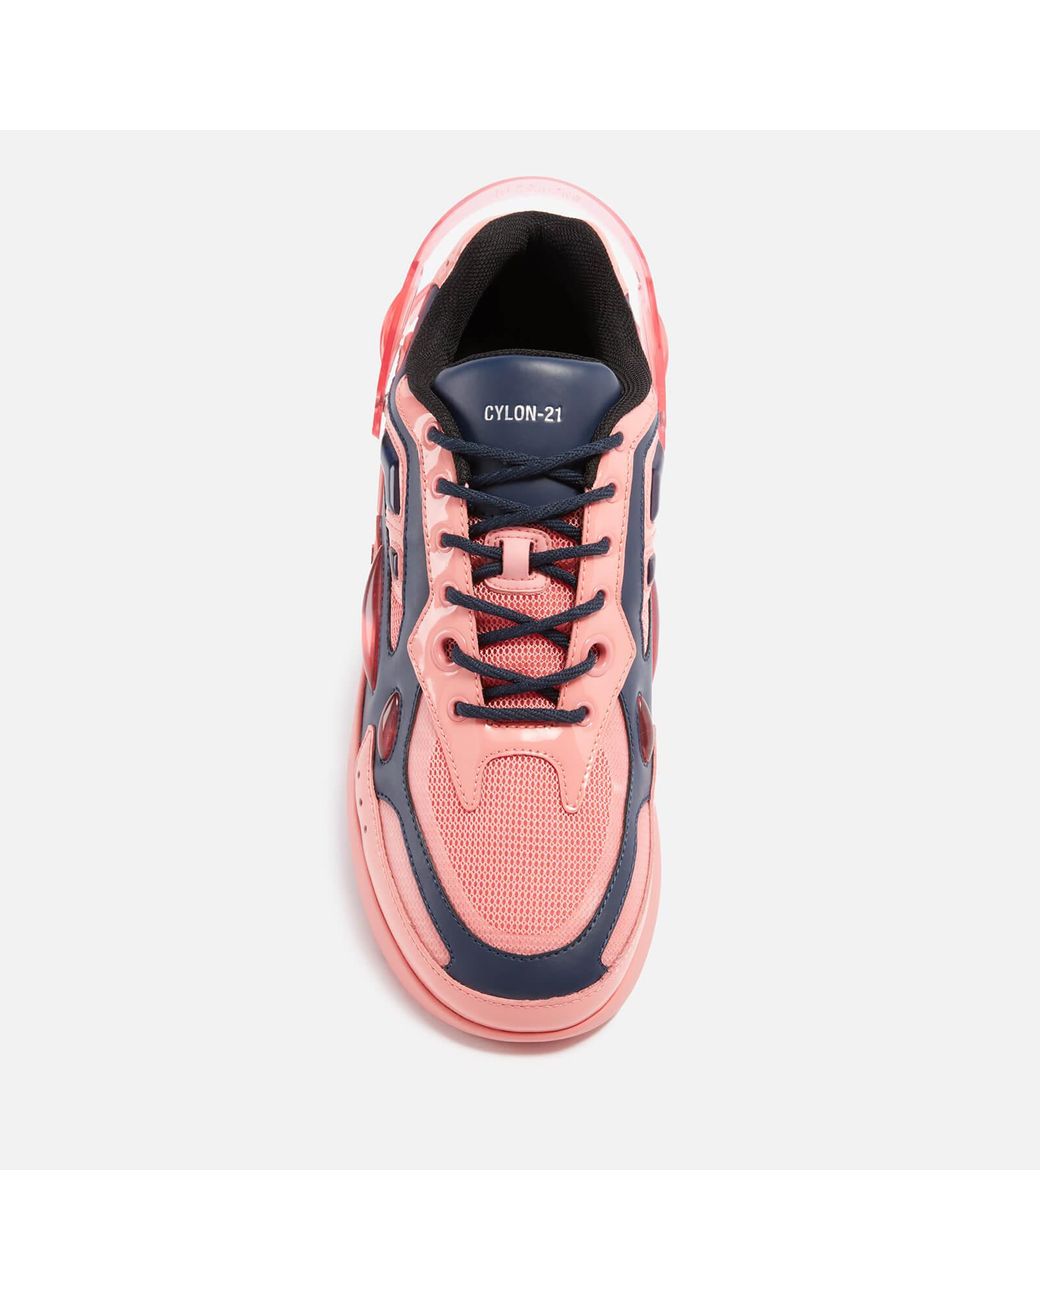 Raf Simons Cylon-21 Rubber, Leather And Mesh Trainers in Pink for 